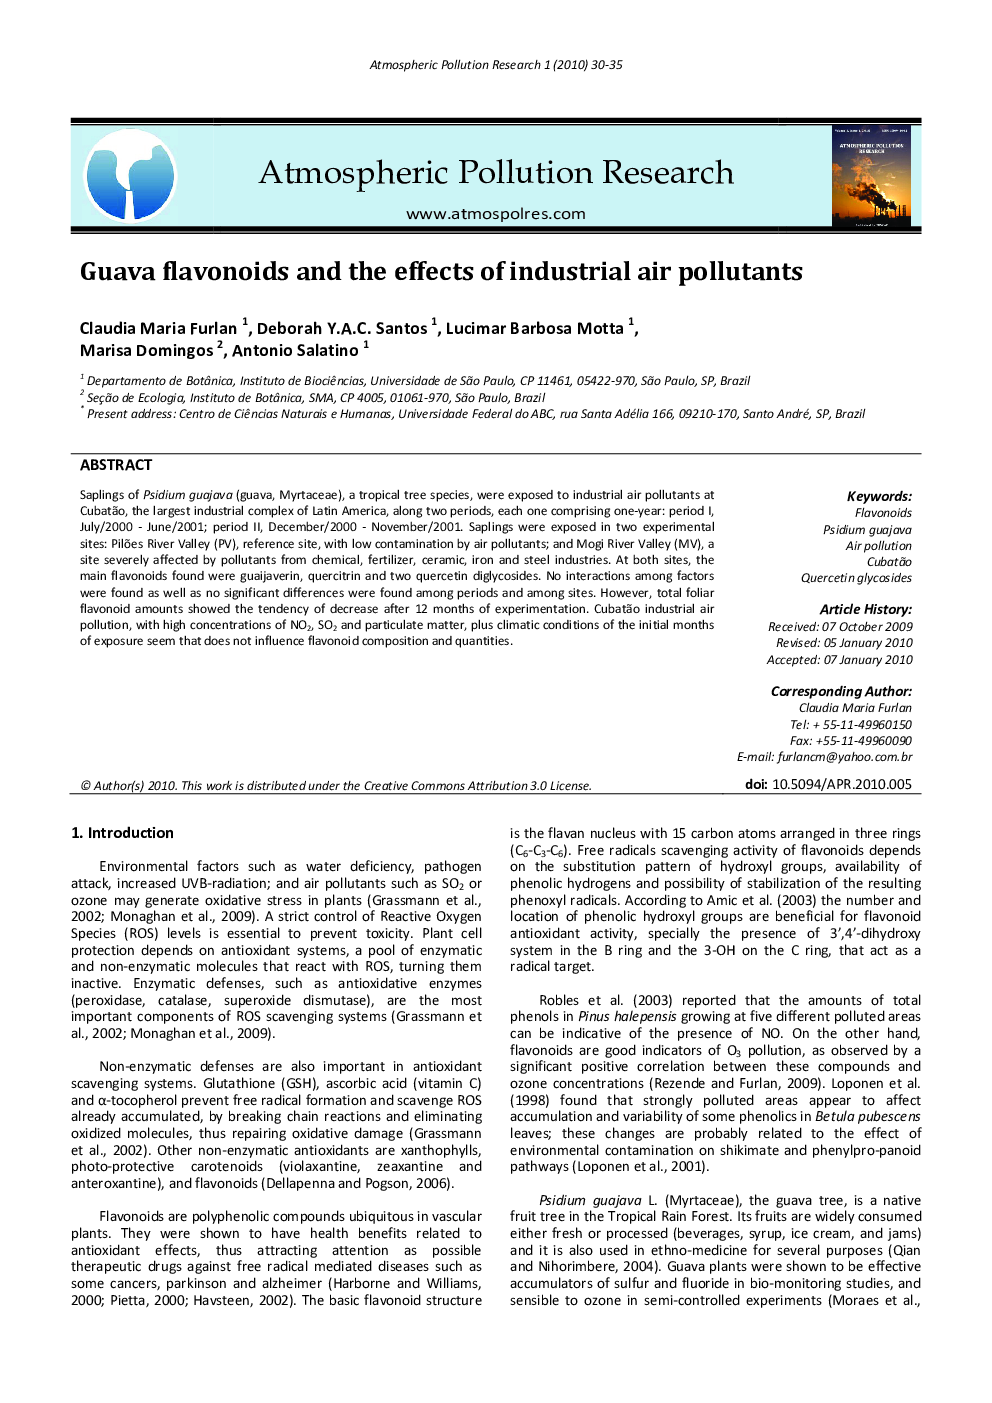 Guava flavonoids and the effects of industrial air pollutants